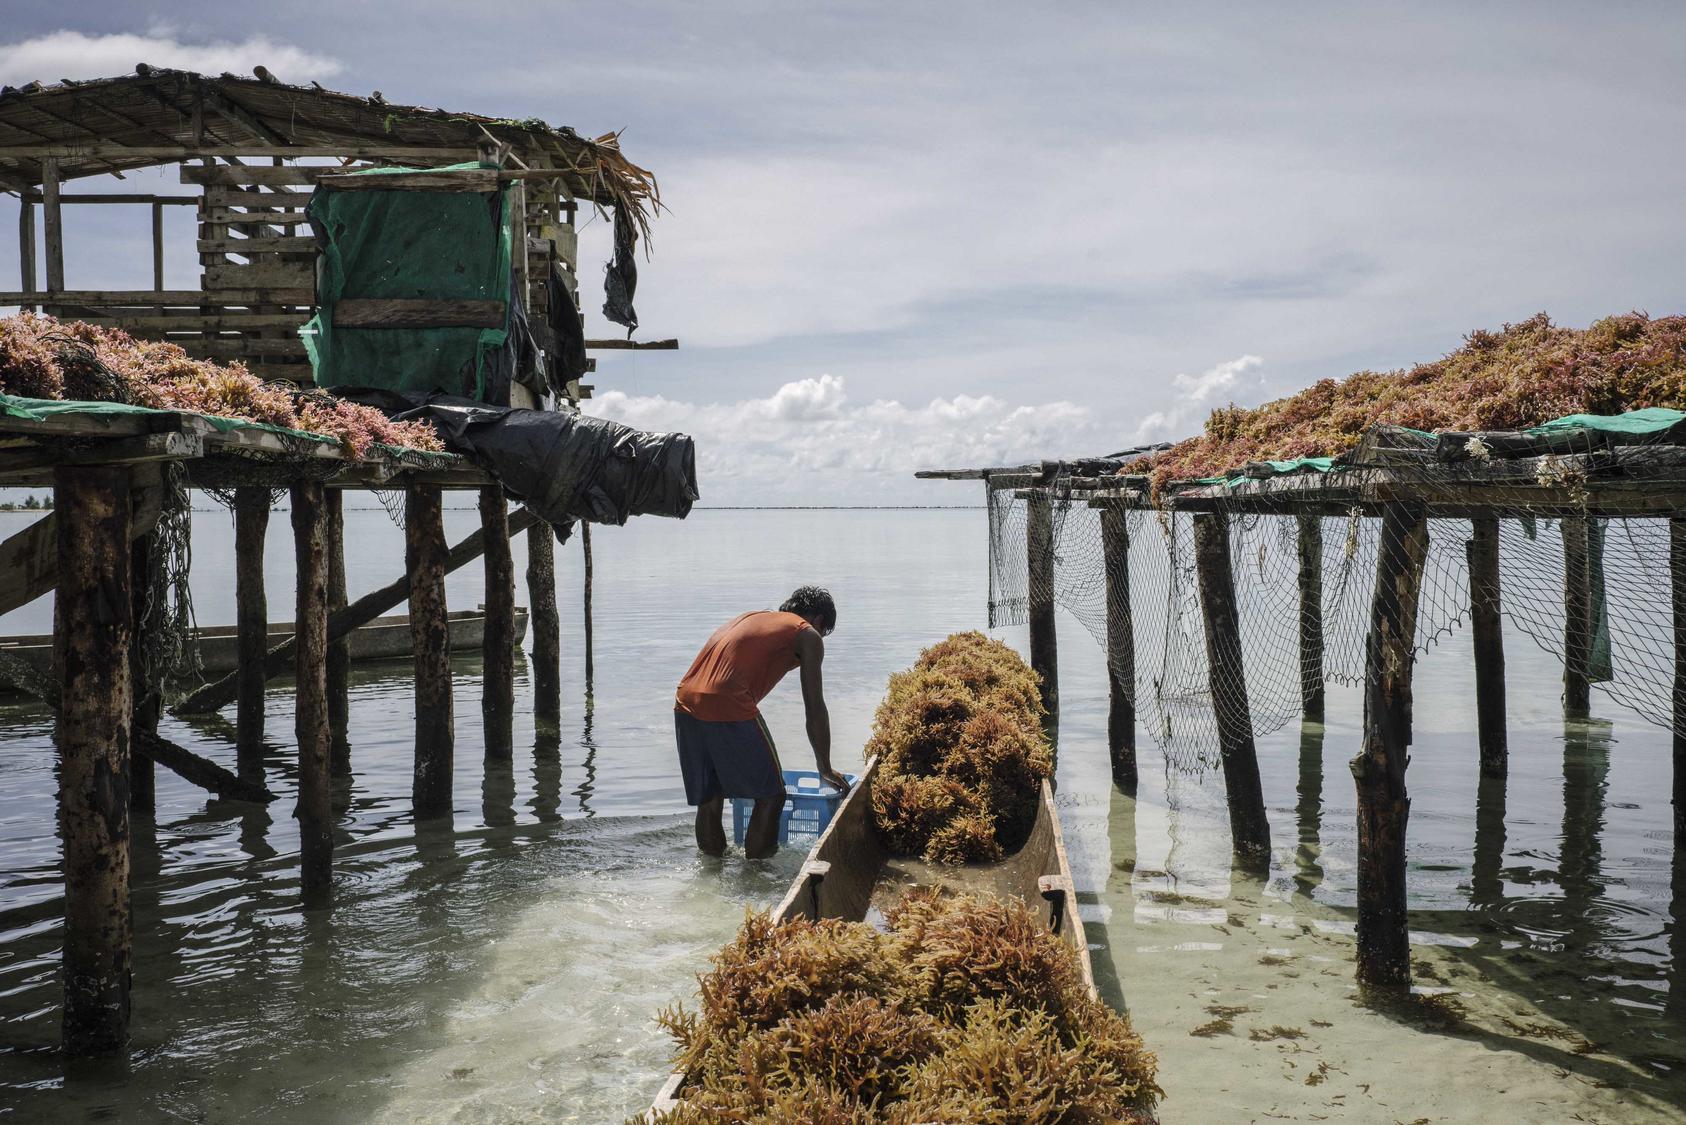 A man unloads farmed seaweed onto a drying dock in Beniamina Island, part of the Solomon Islands, June 5, 2018. In many parts of the Solomon Islands the land has disappeared, drowned by heaving currents and rising seas. (Adam Ferguson/The New York Times)